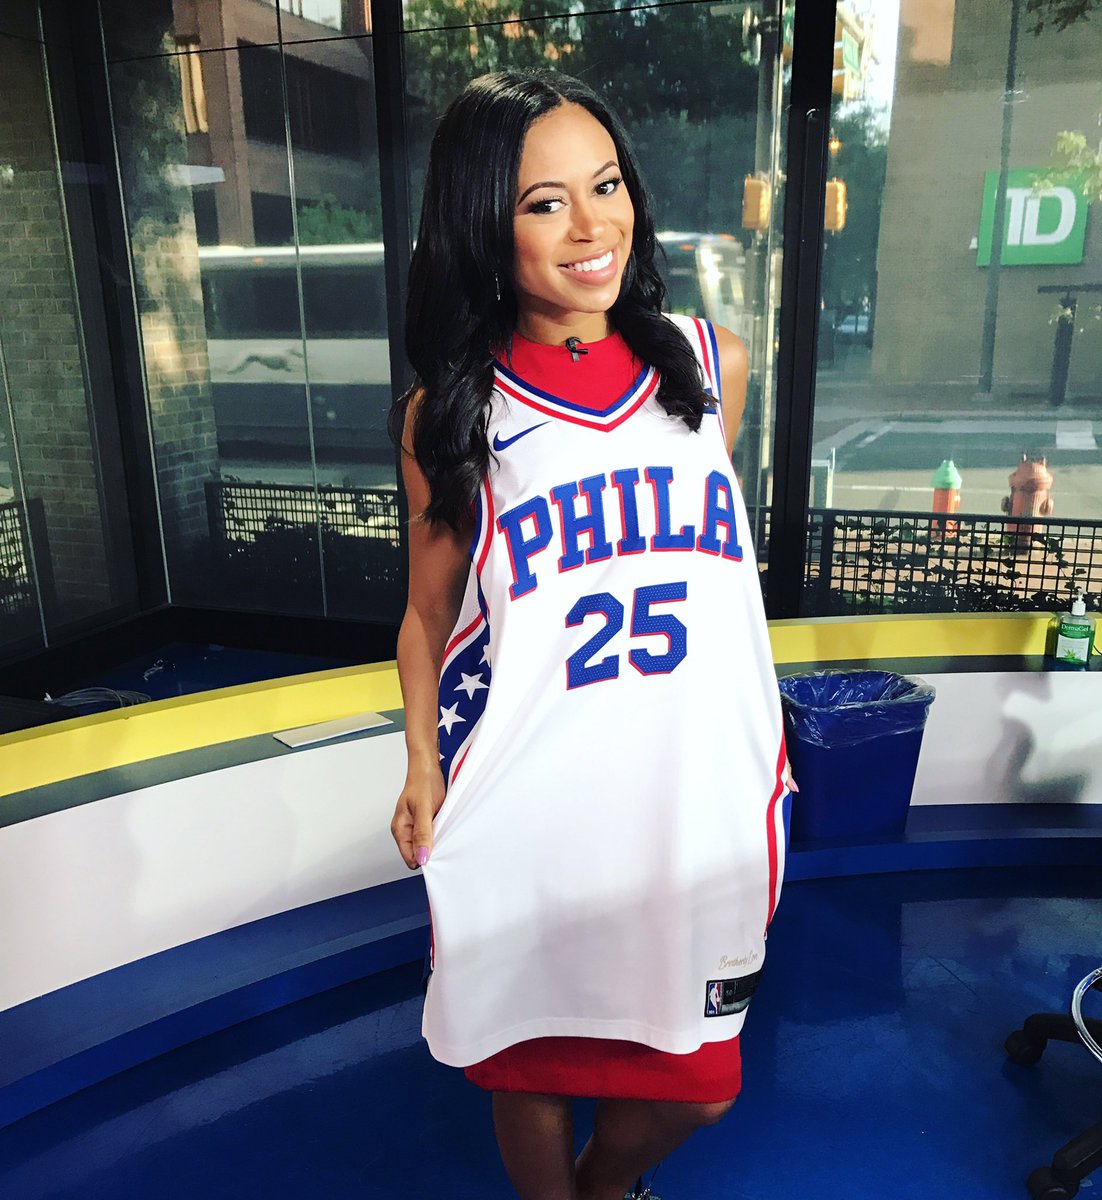 Alex Holley on X: I had to try on the new #Sixers jersey! SN